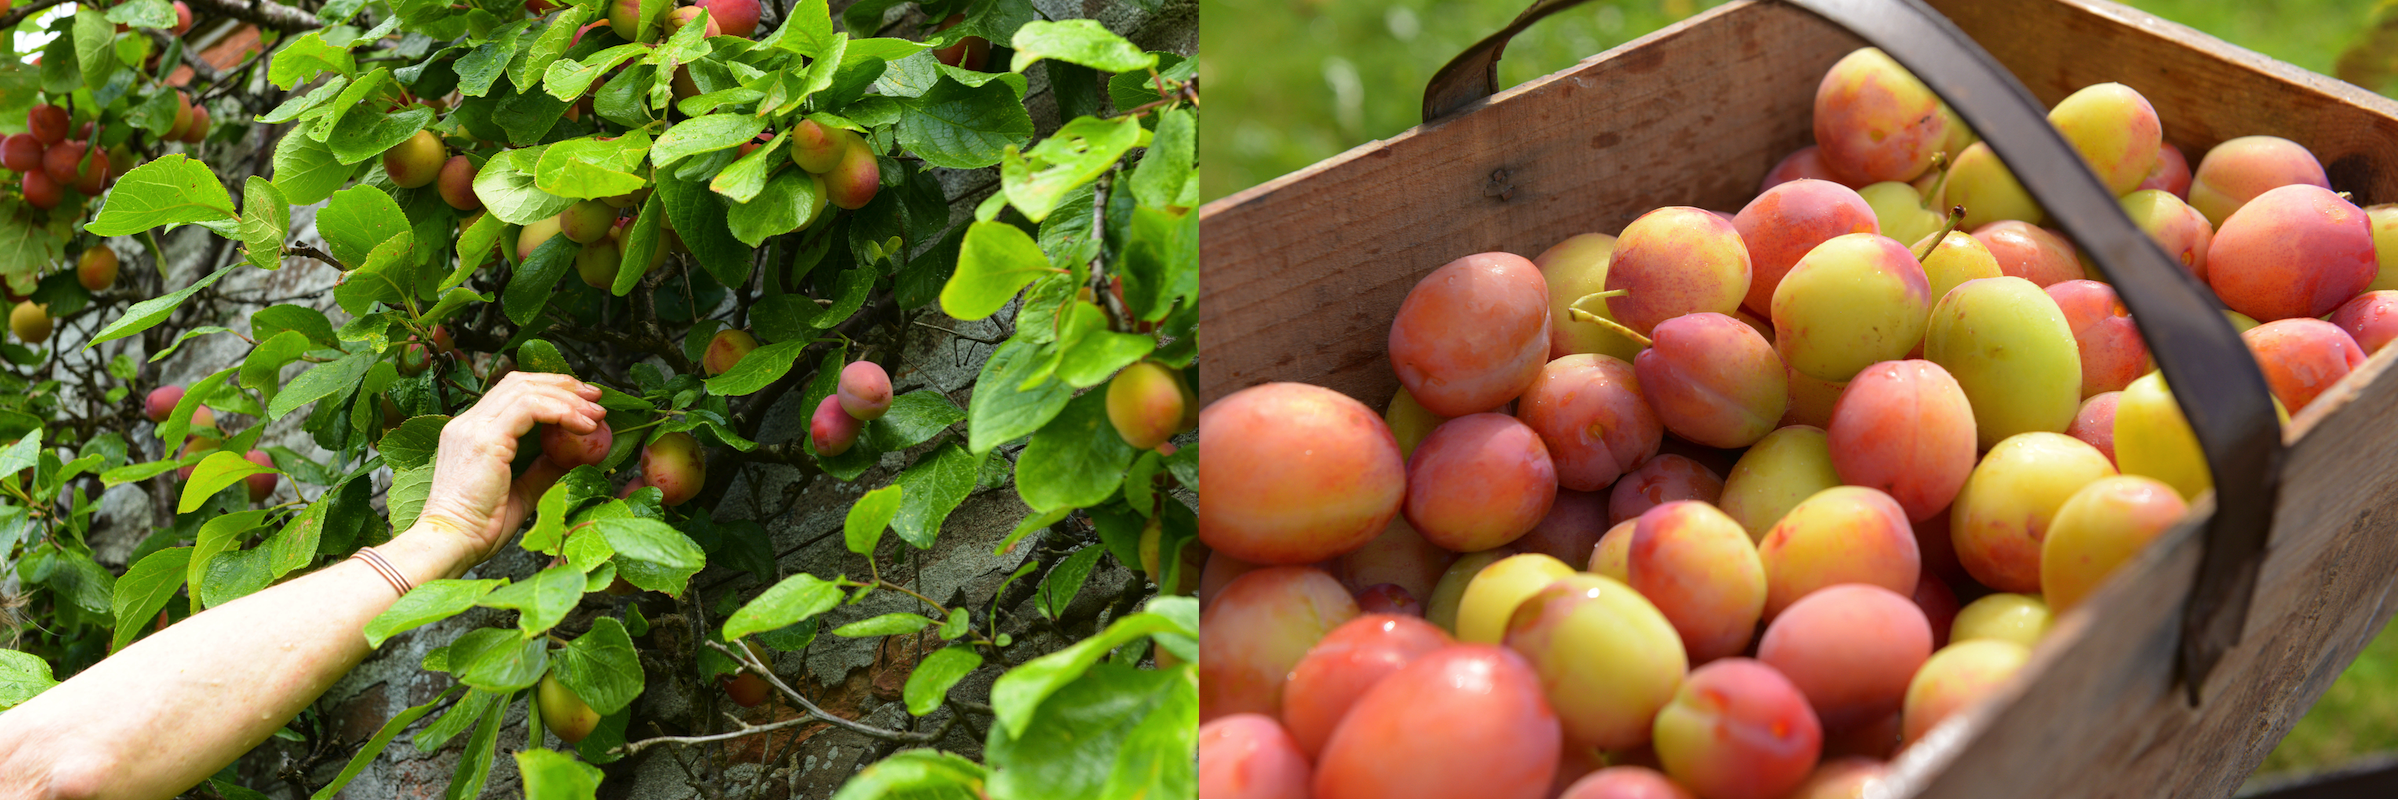 Gordon Castle&#8217;s own variety of Scottish plums are freshly harvested from our award-winning Walled Garden, ready for purchase in their potting shed and to use in their Café!